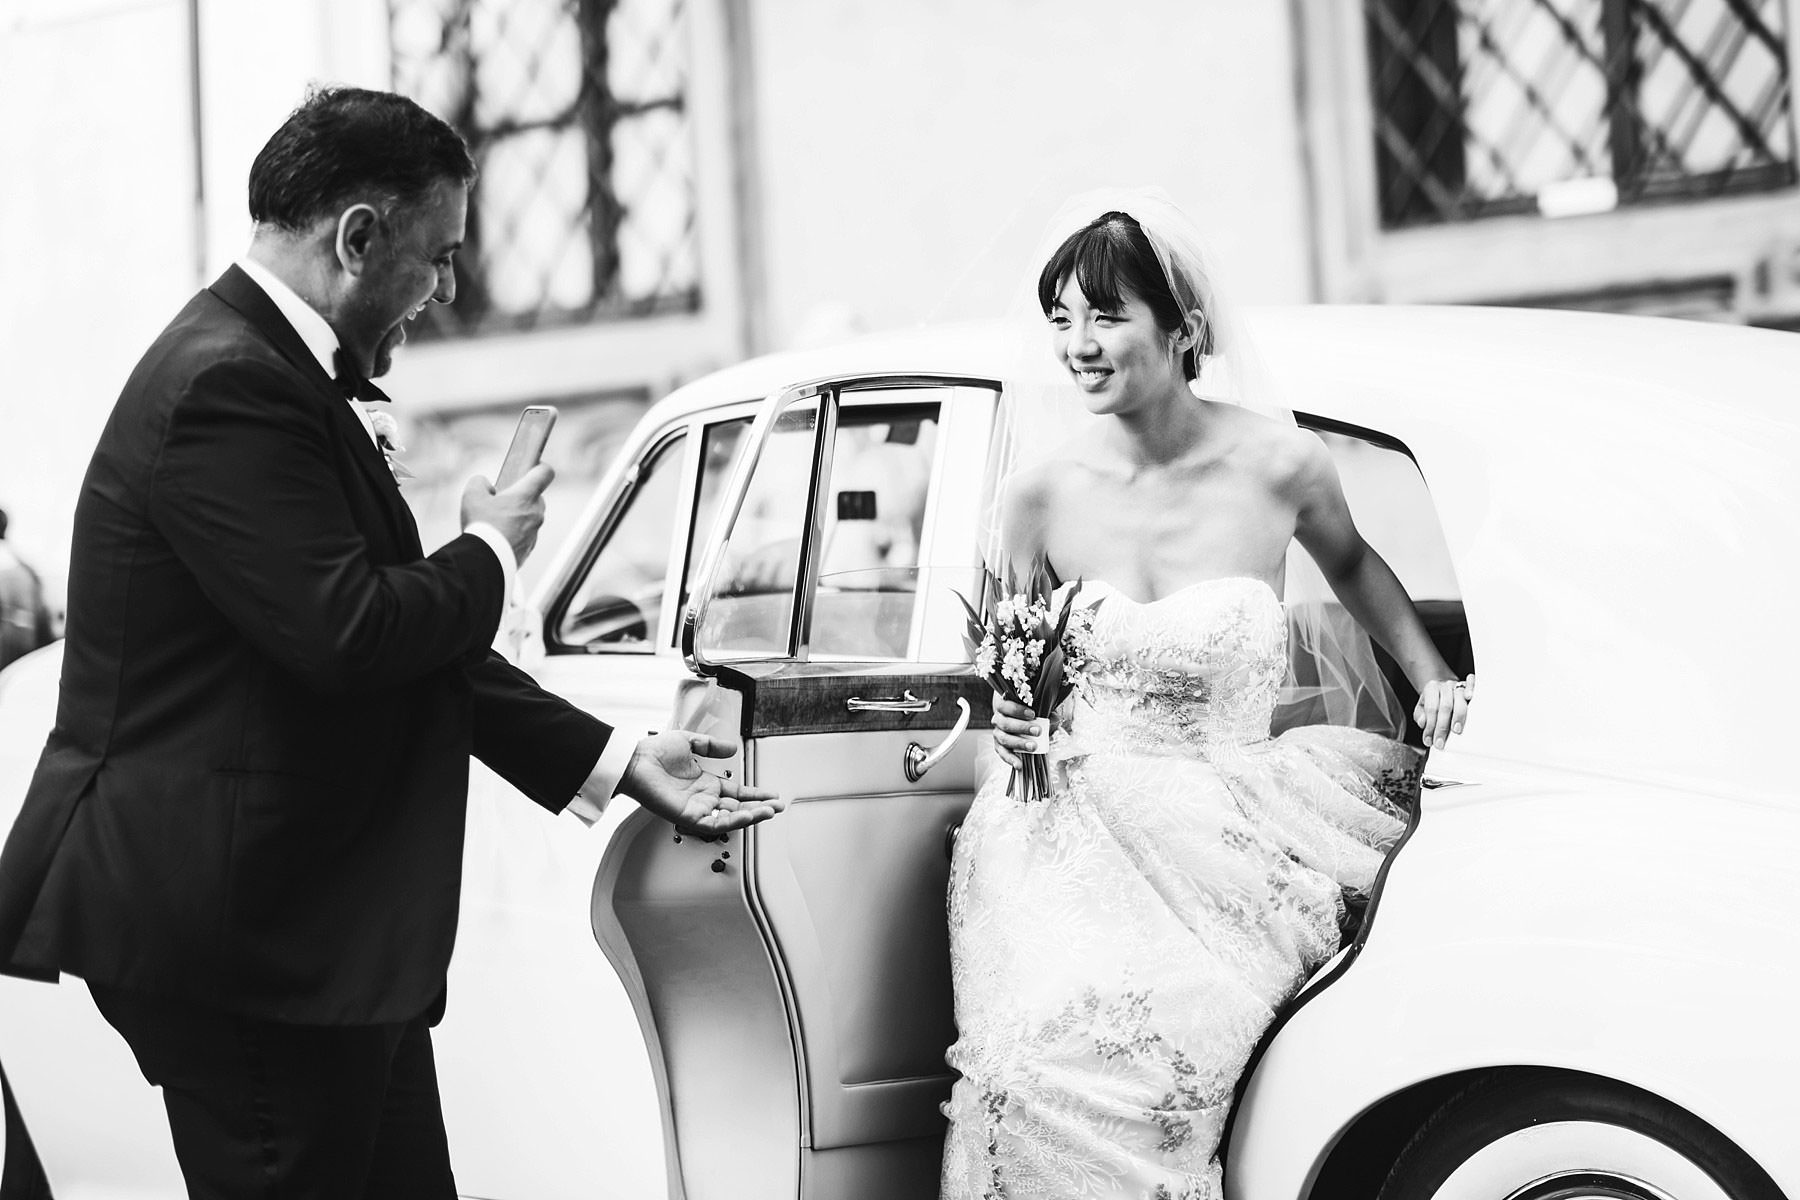 Fully express your love with pre wedding and wedding photos in Florence